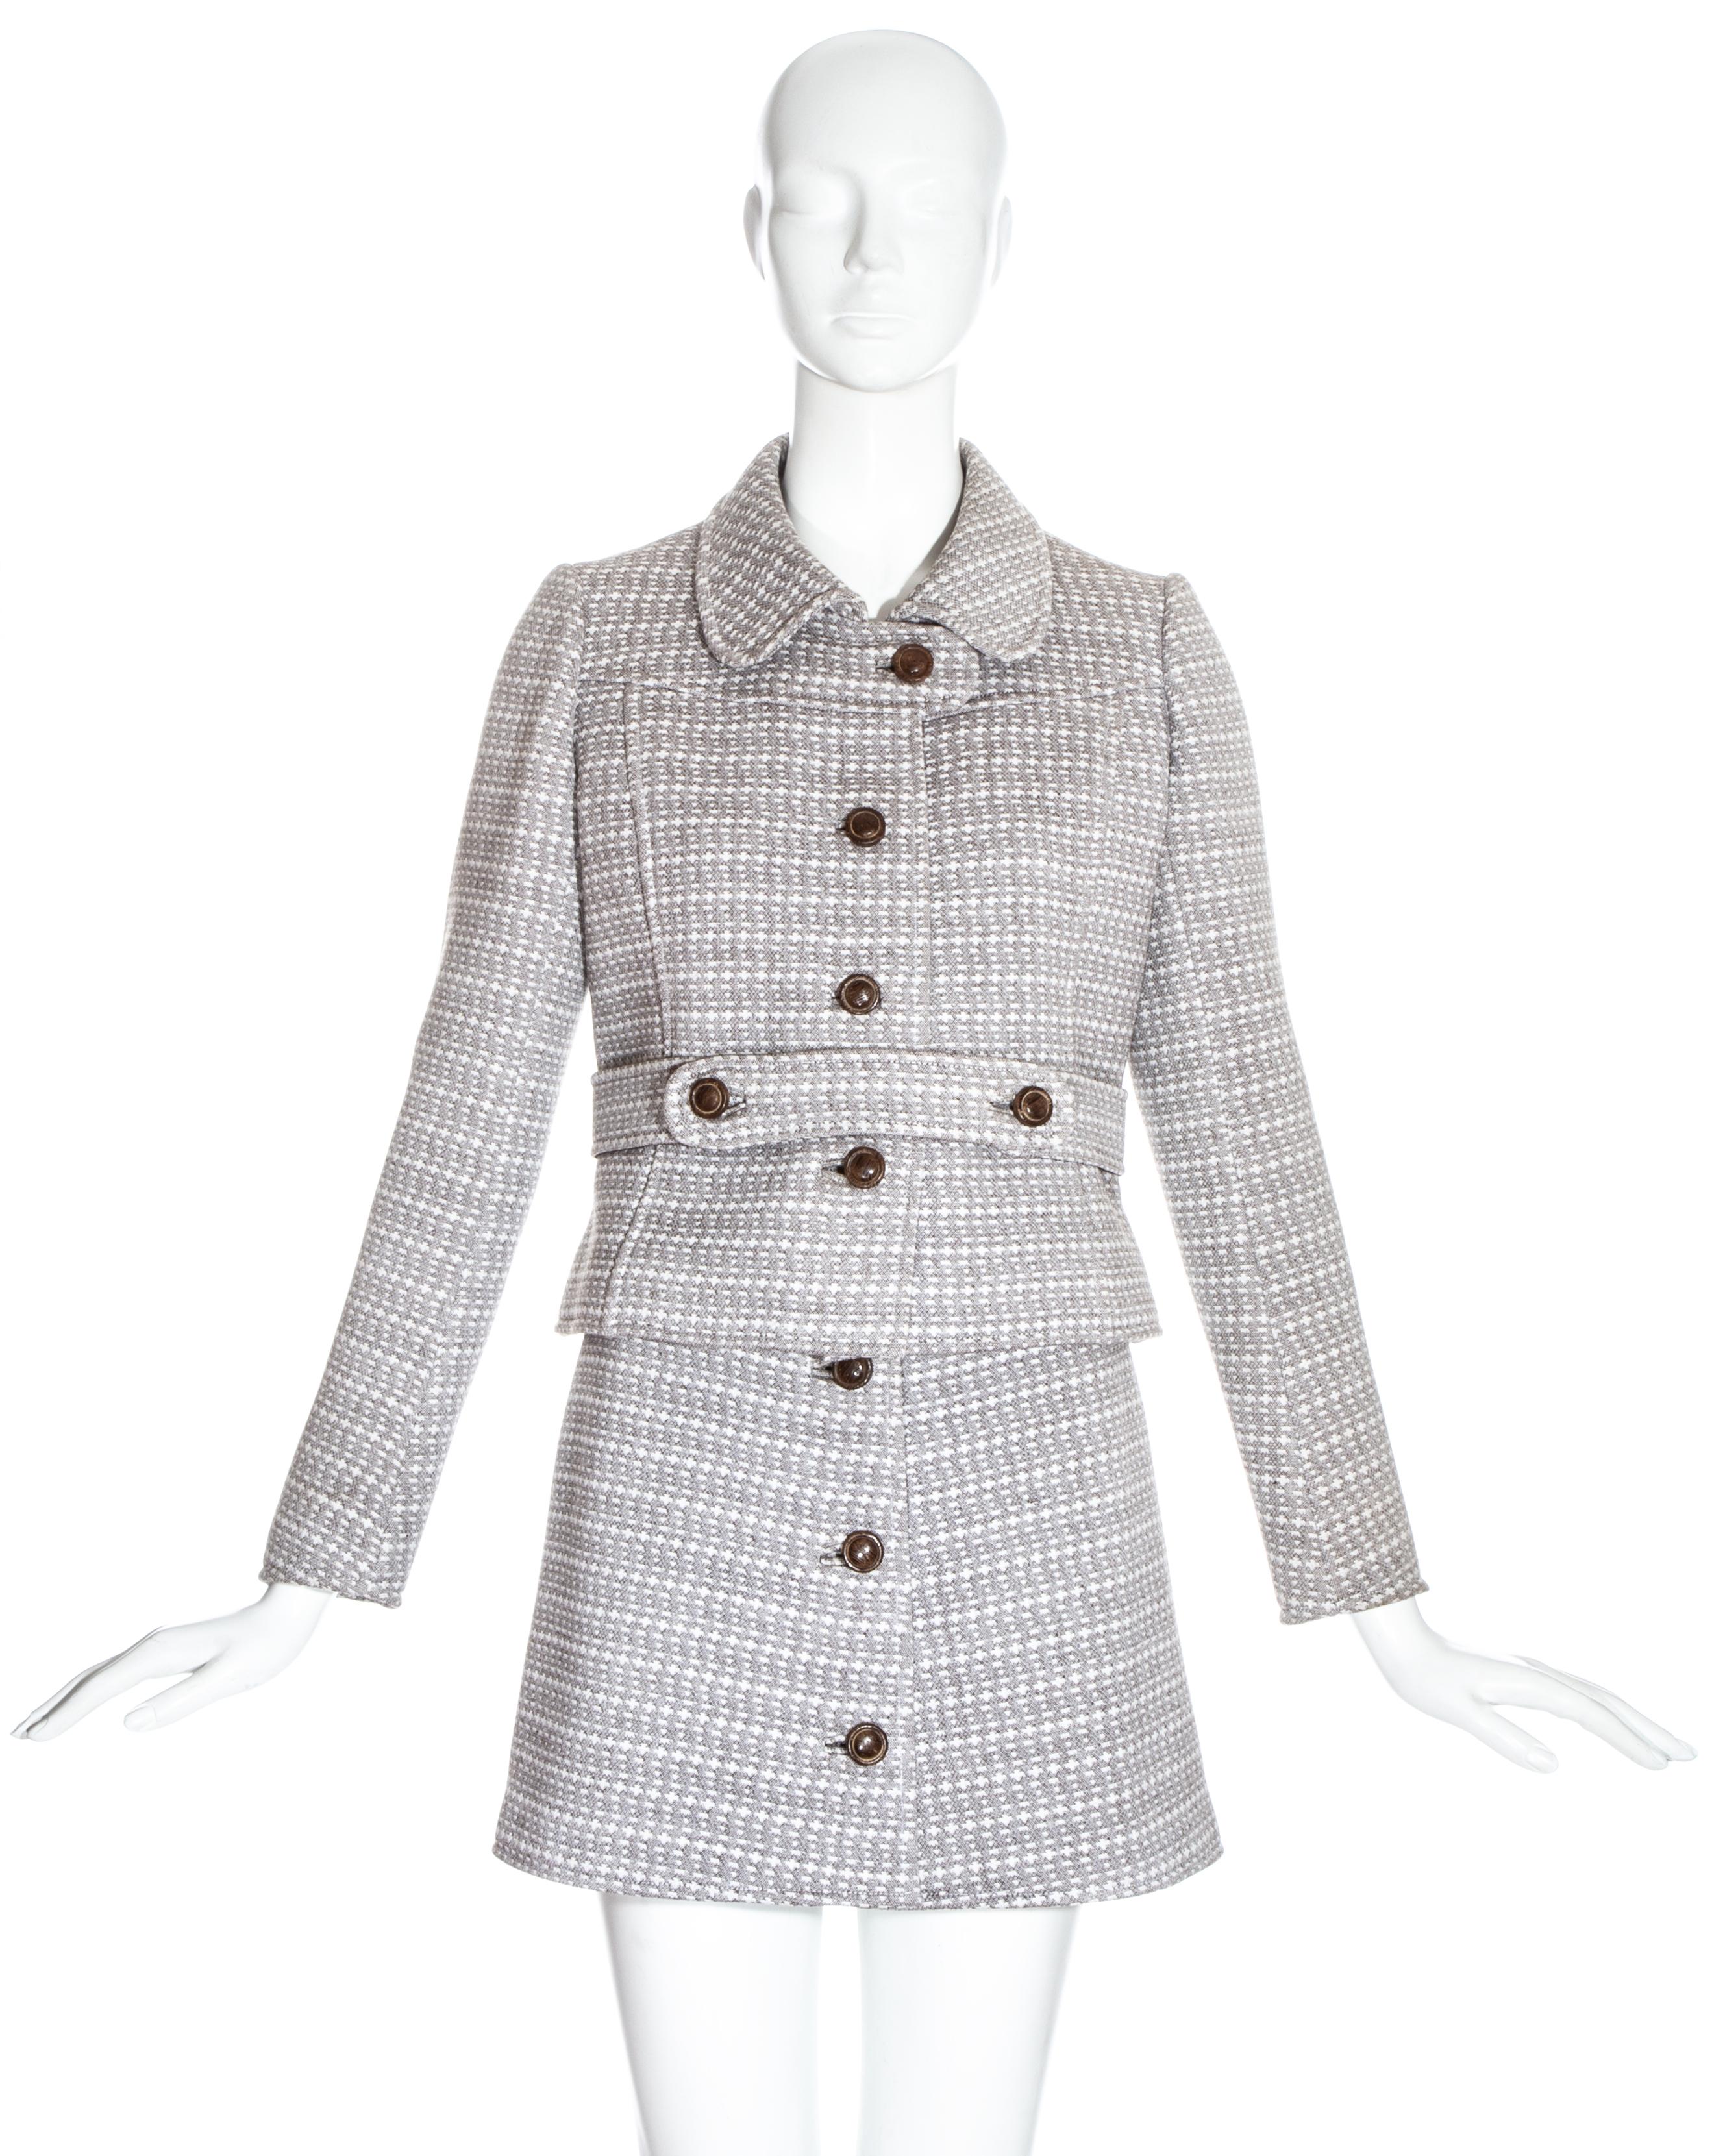 Courreges couture brown wool mini skirt suit with wooden buttons and silk lining. 

c. 1969